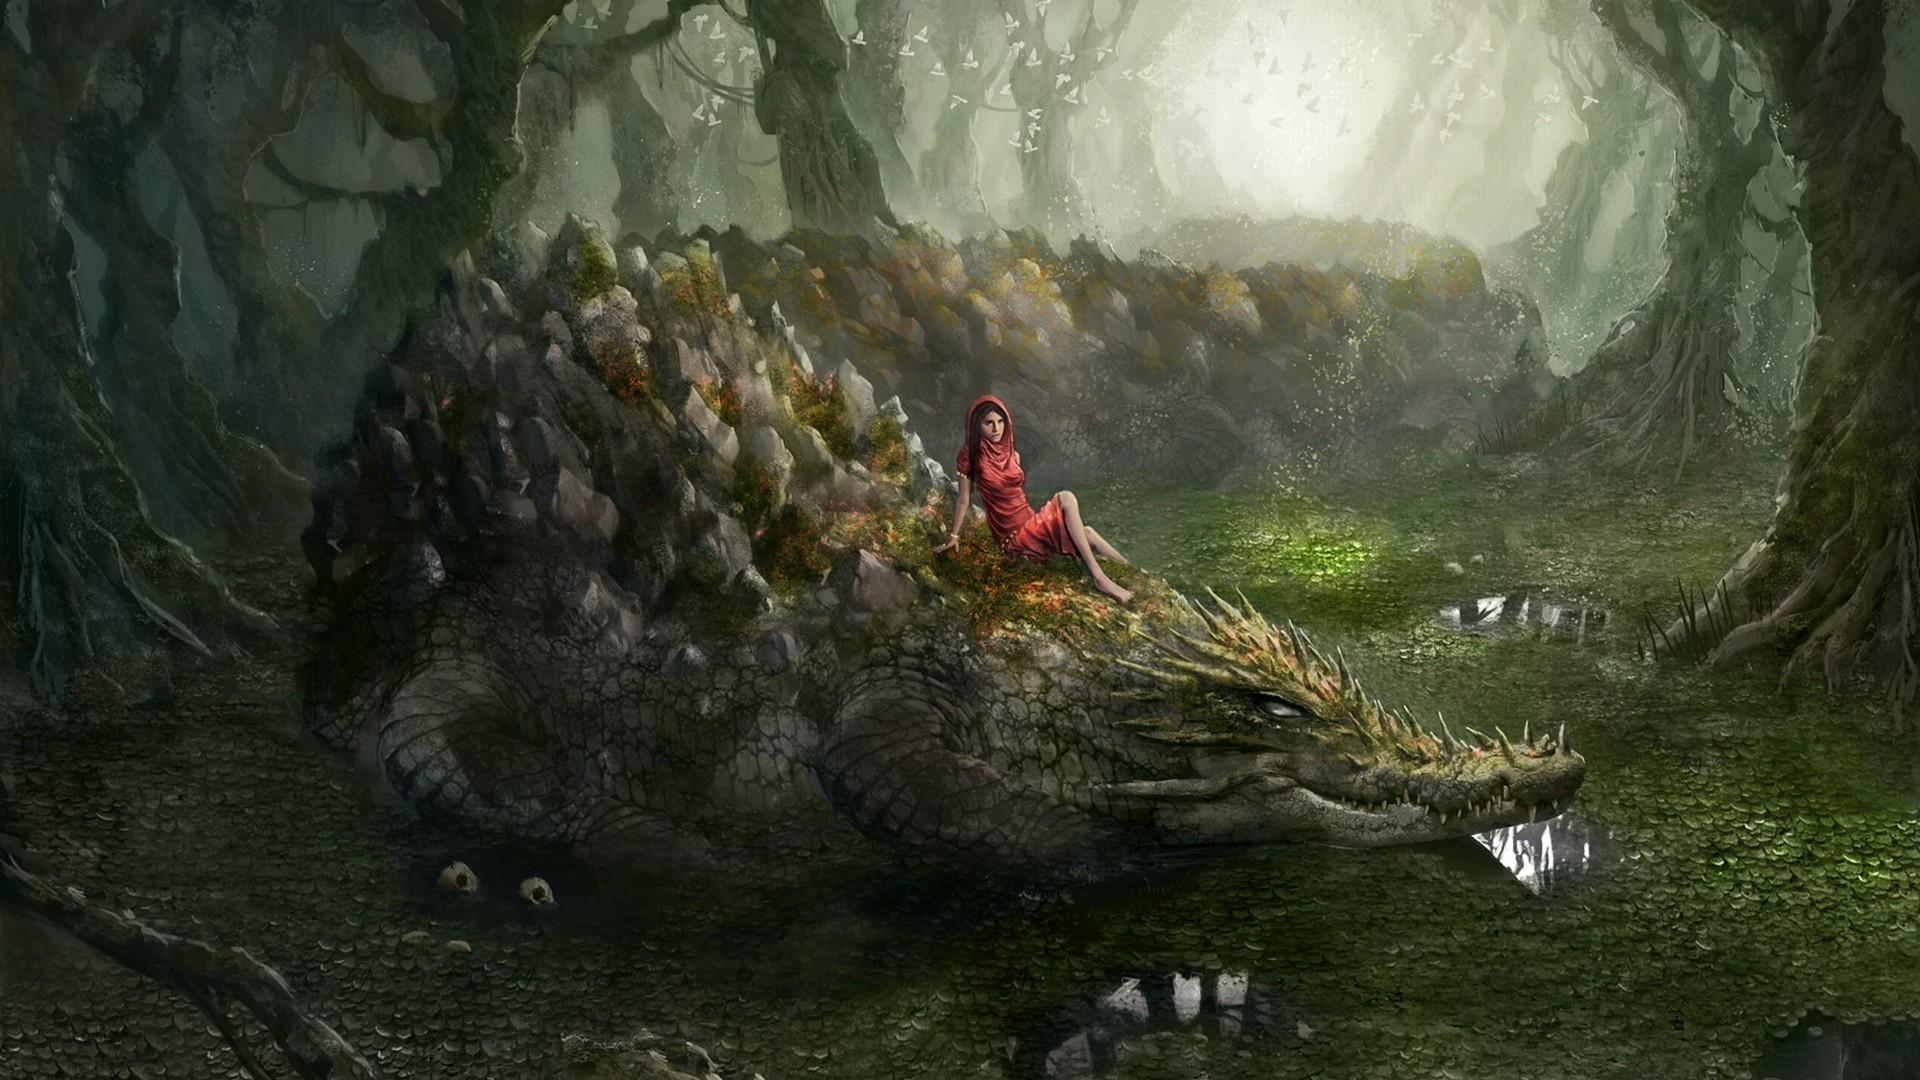 The girl on the crocodile. Android wallpaper for free